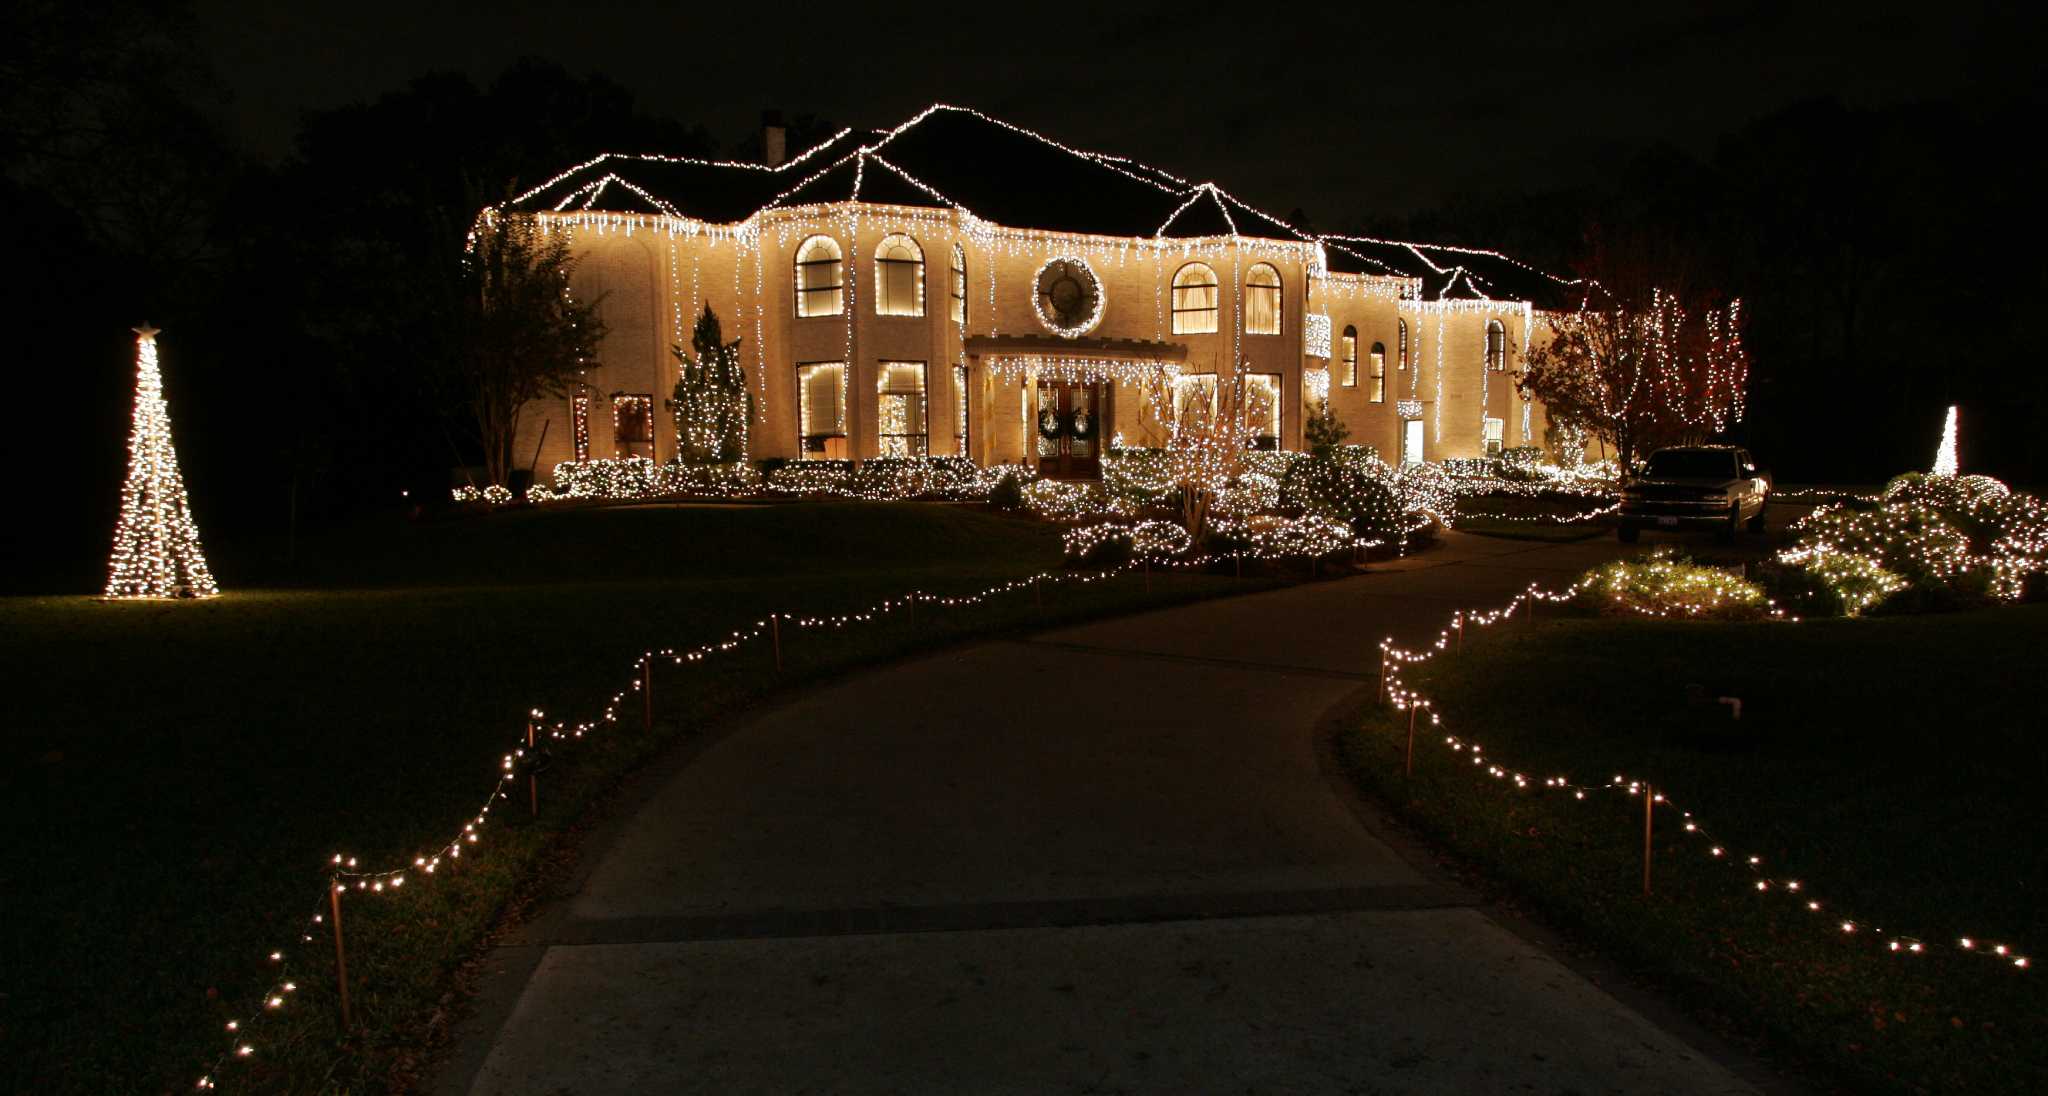 Christmas lights in Texas are bigger naturally